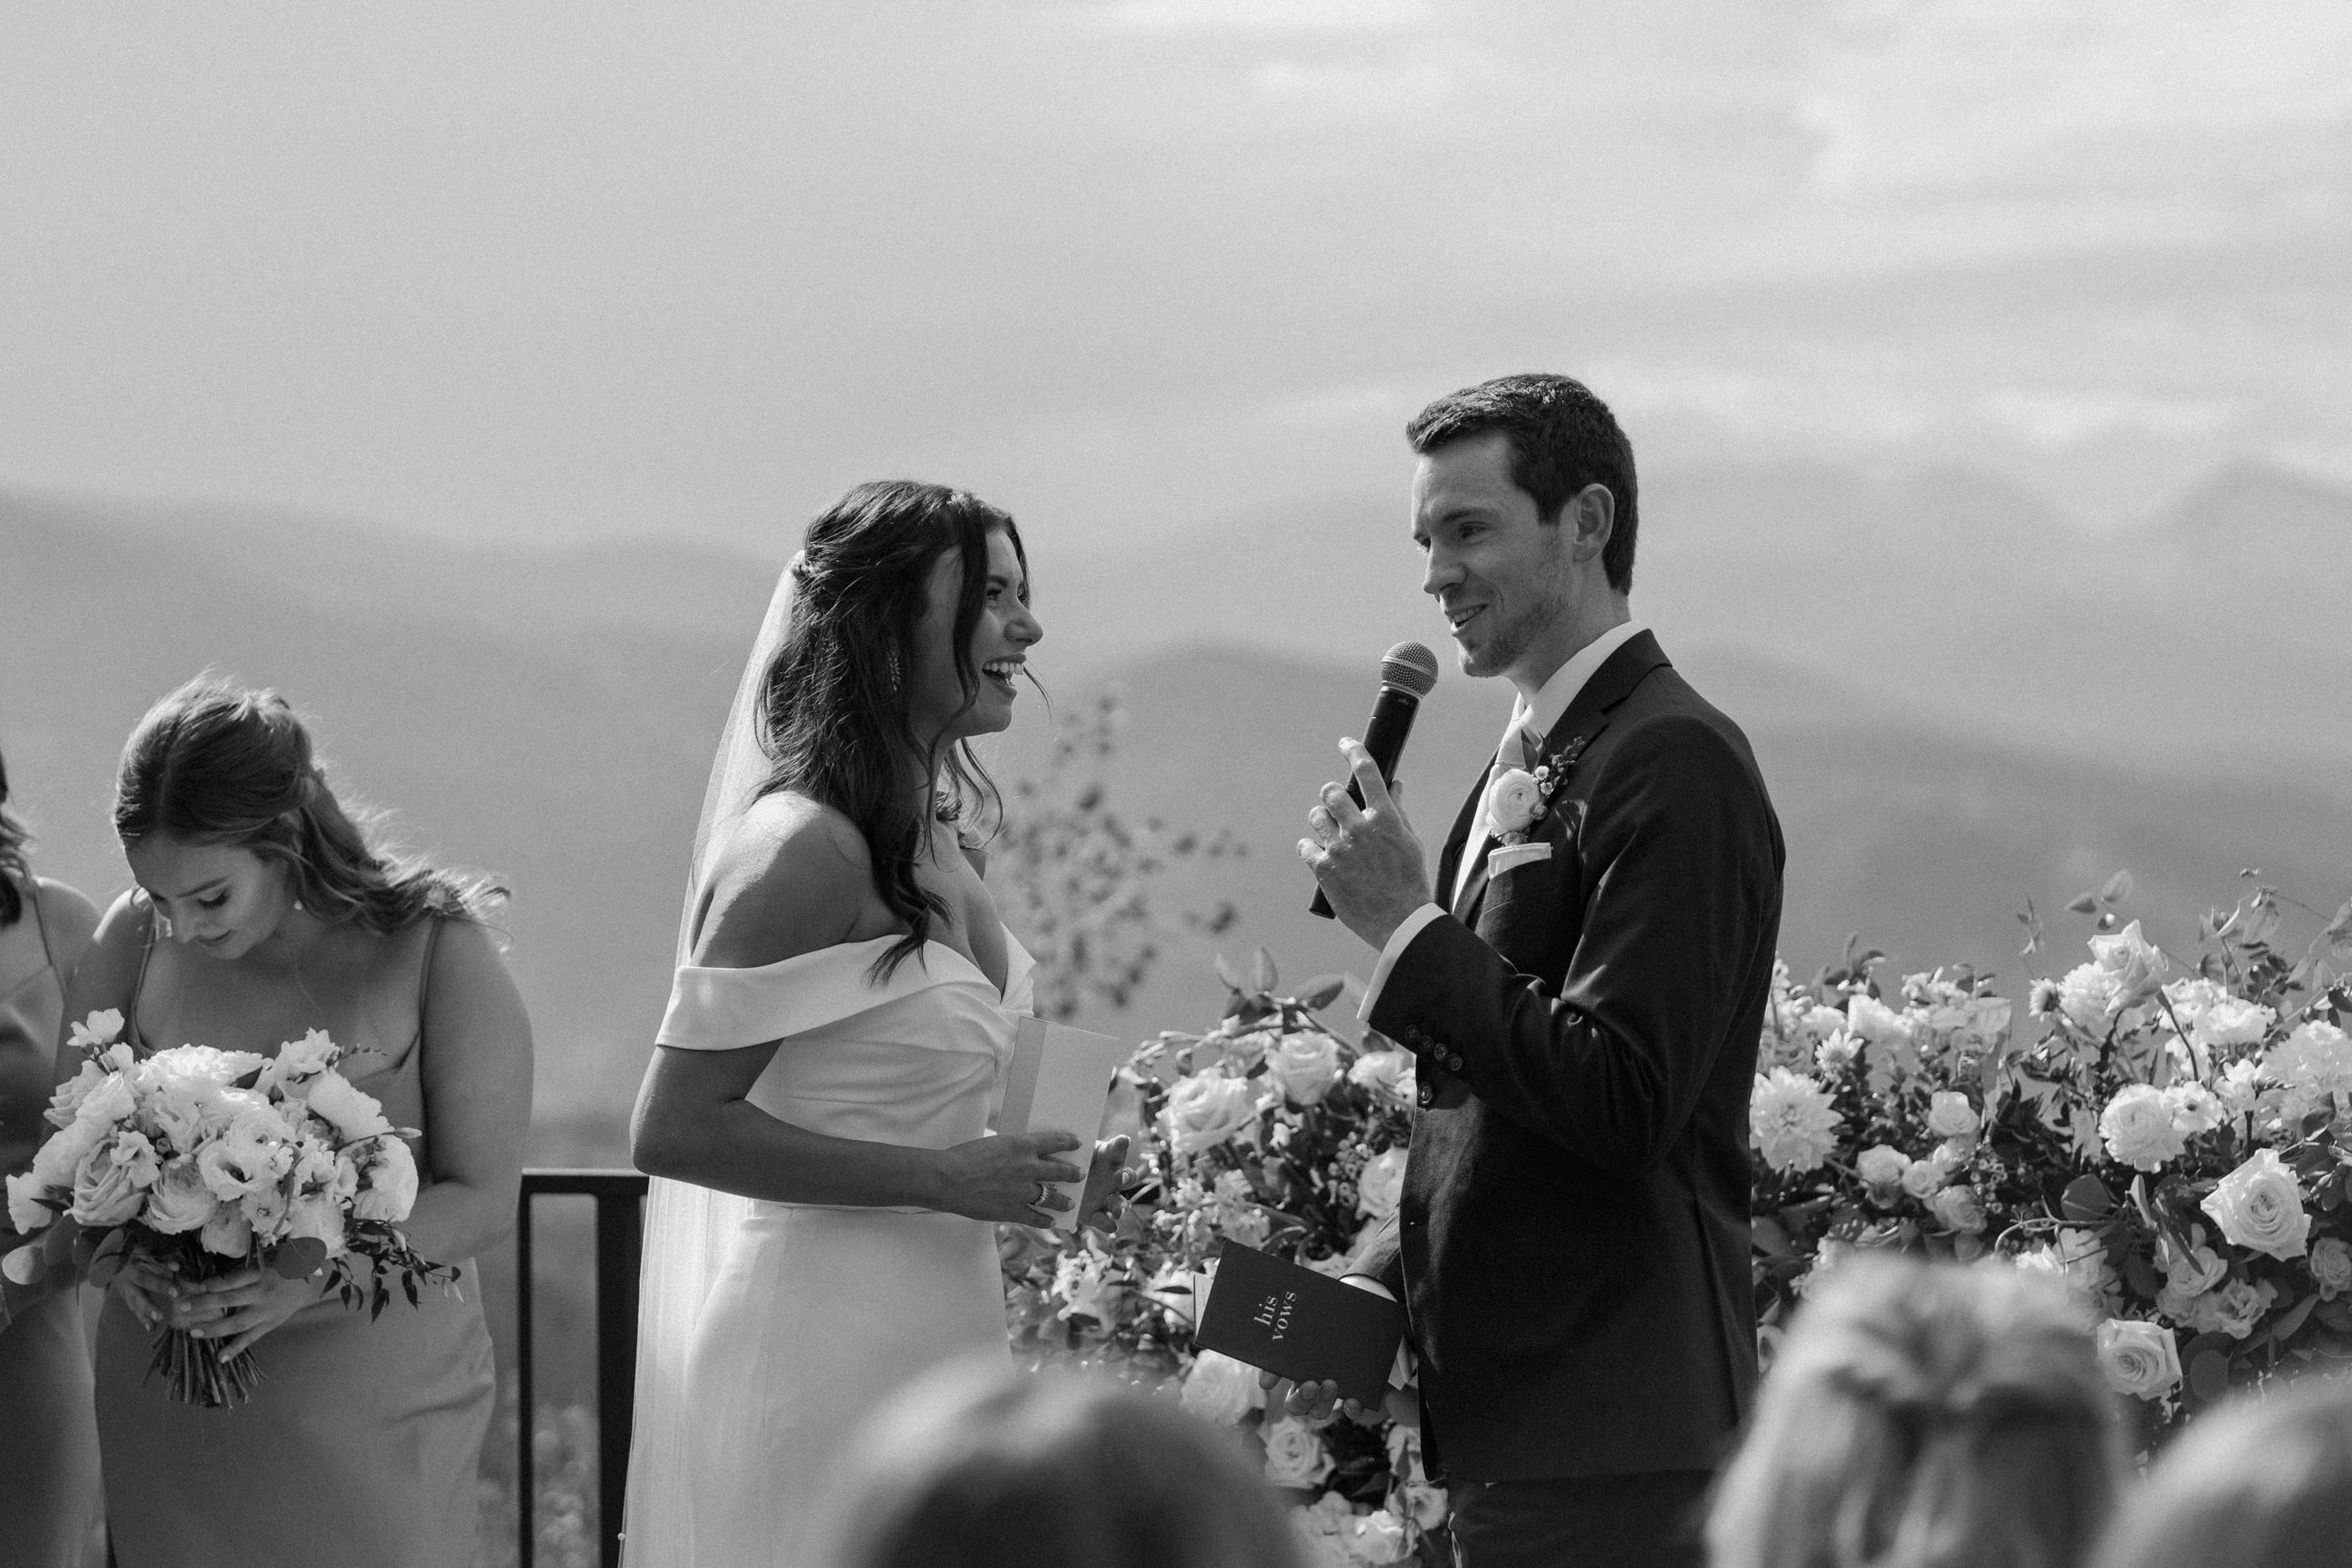 The groom says his vows as the bride laughs